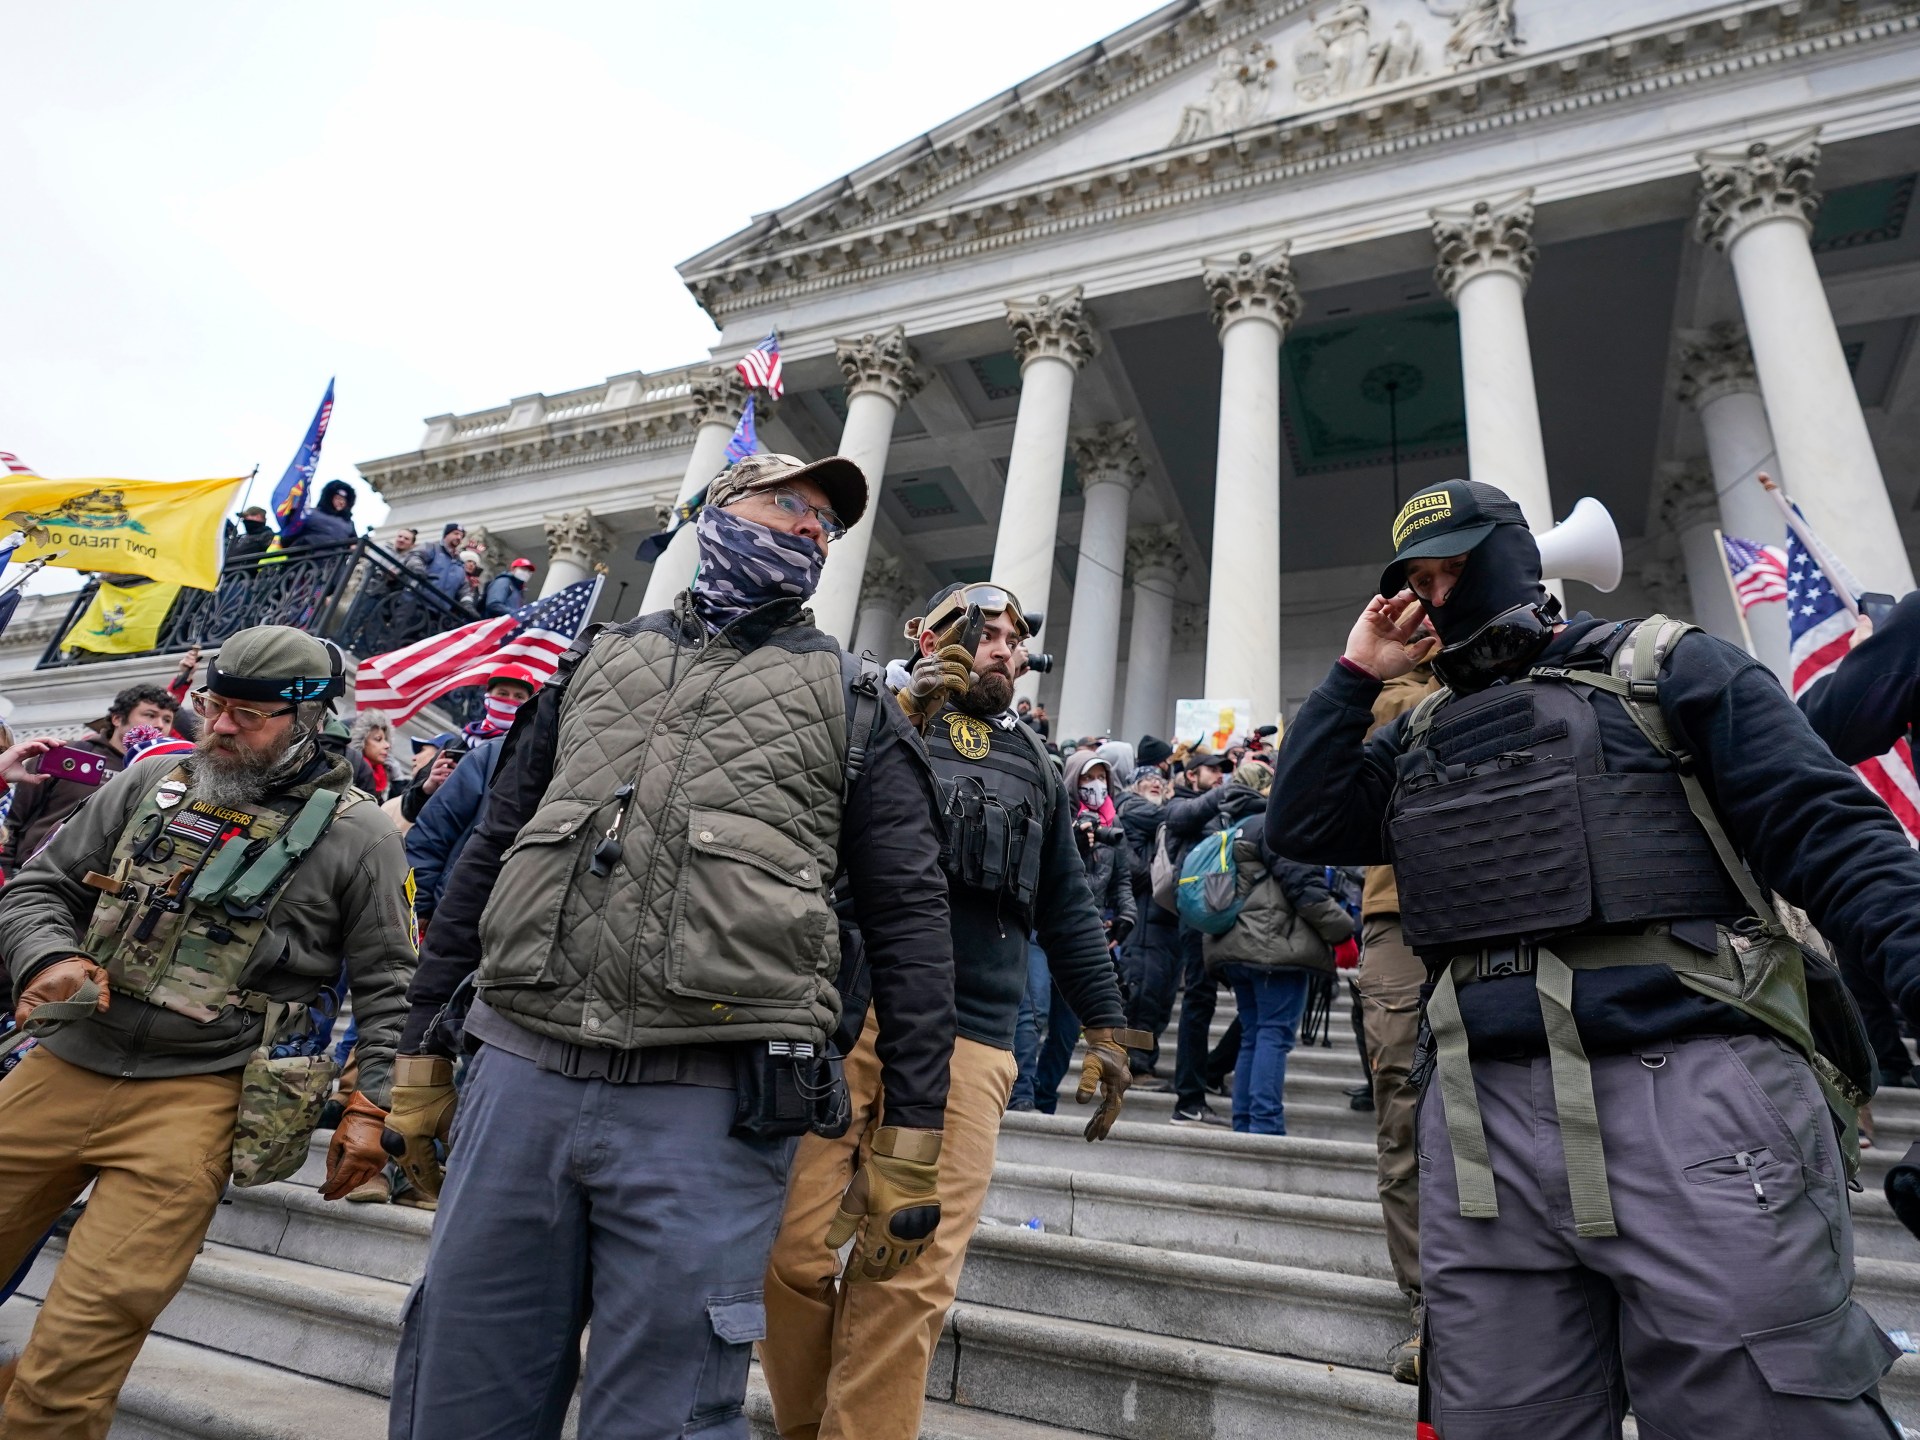 Three years on, January 6 Capitol riot reverberates in US courts, 2024 race | Politics News